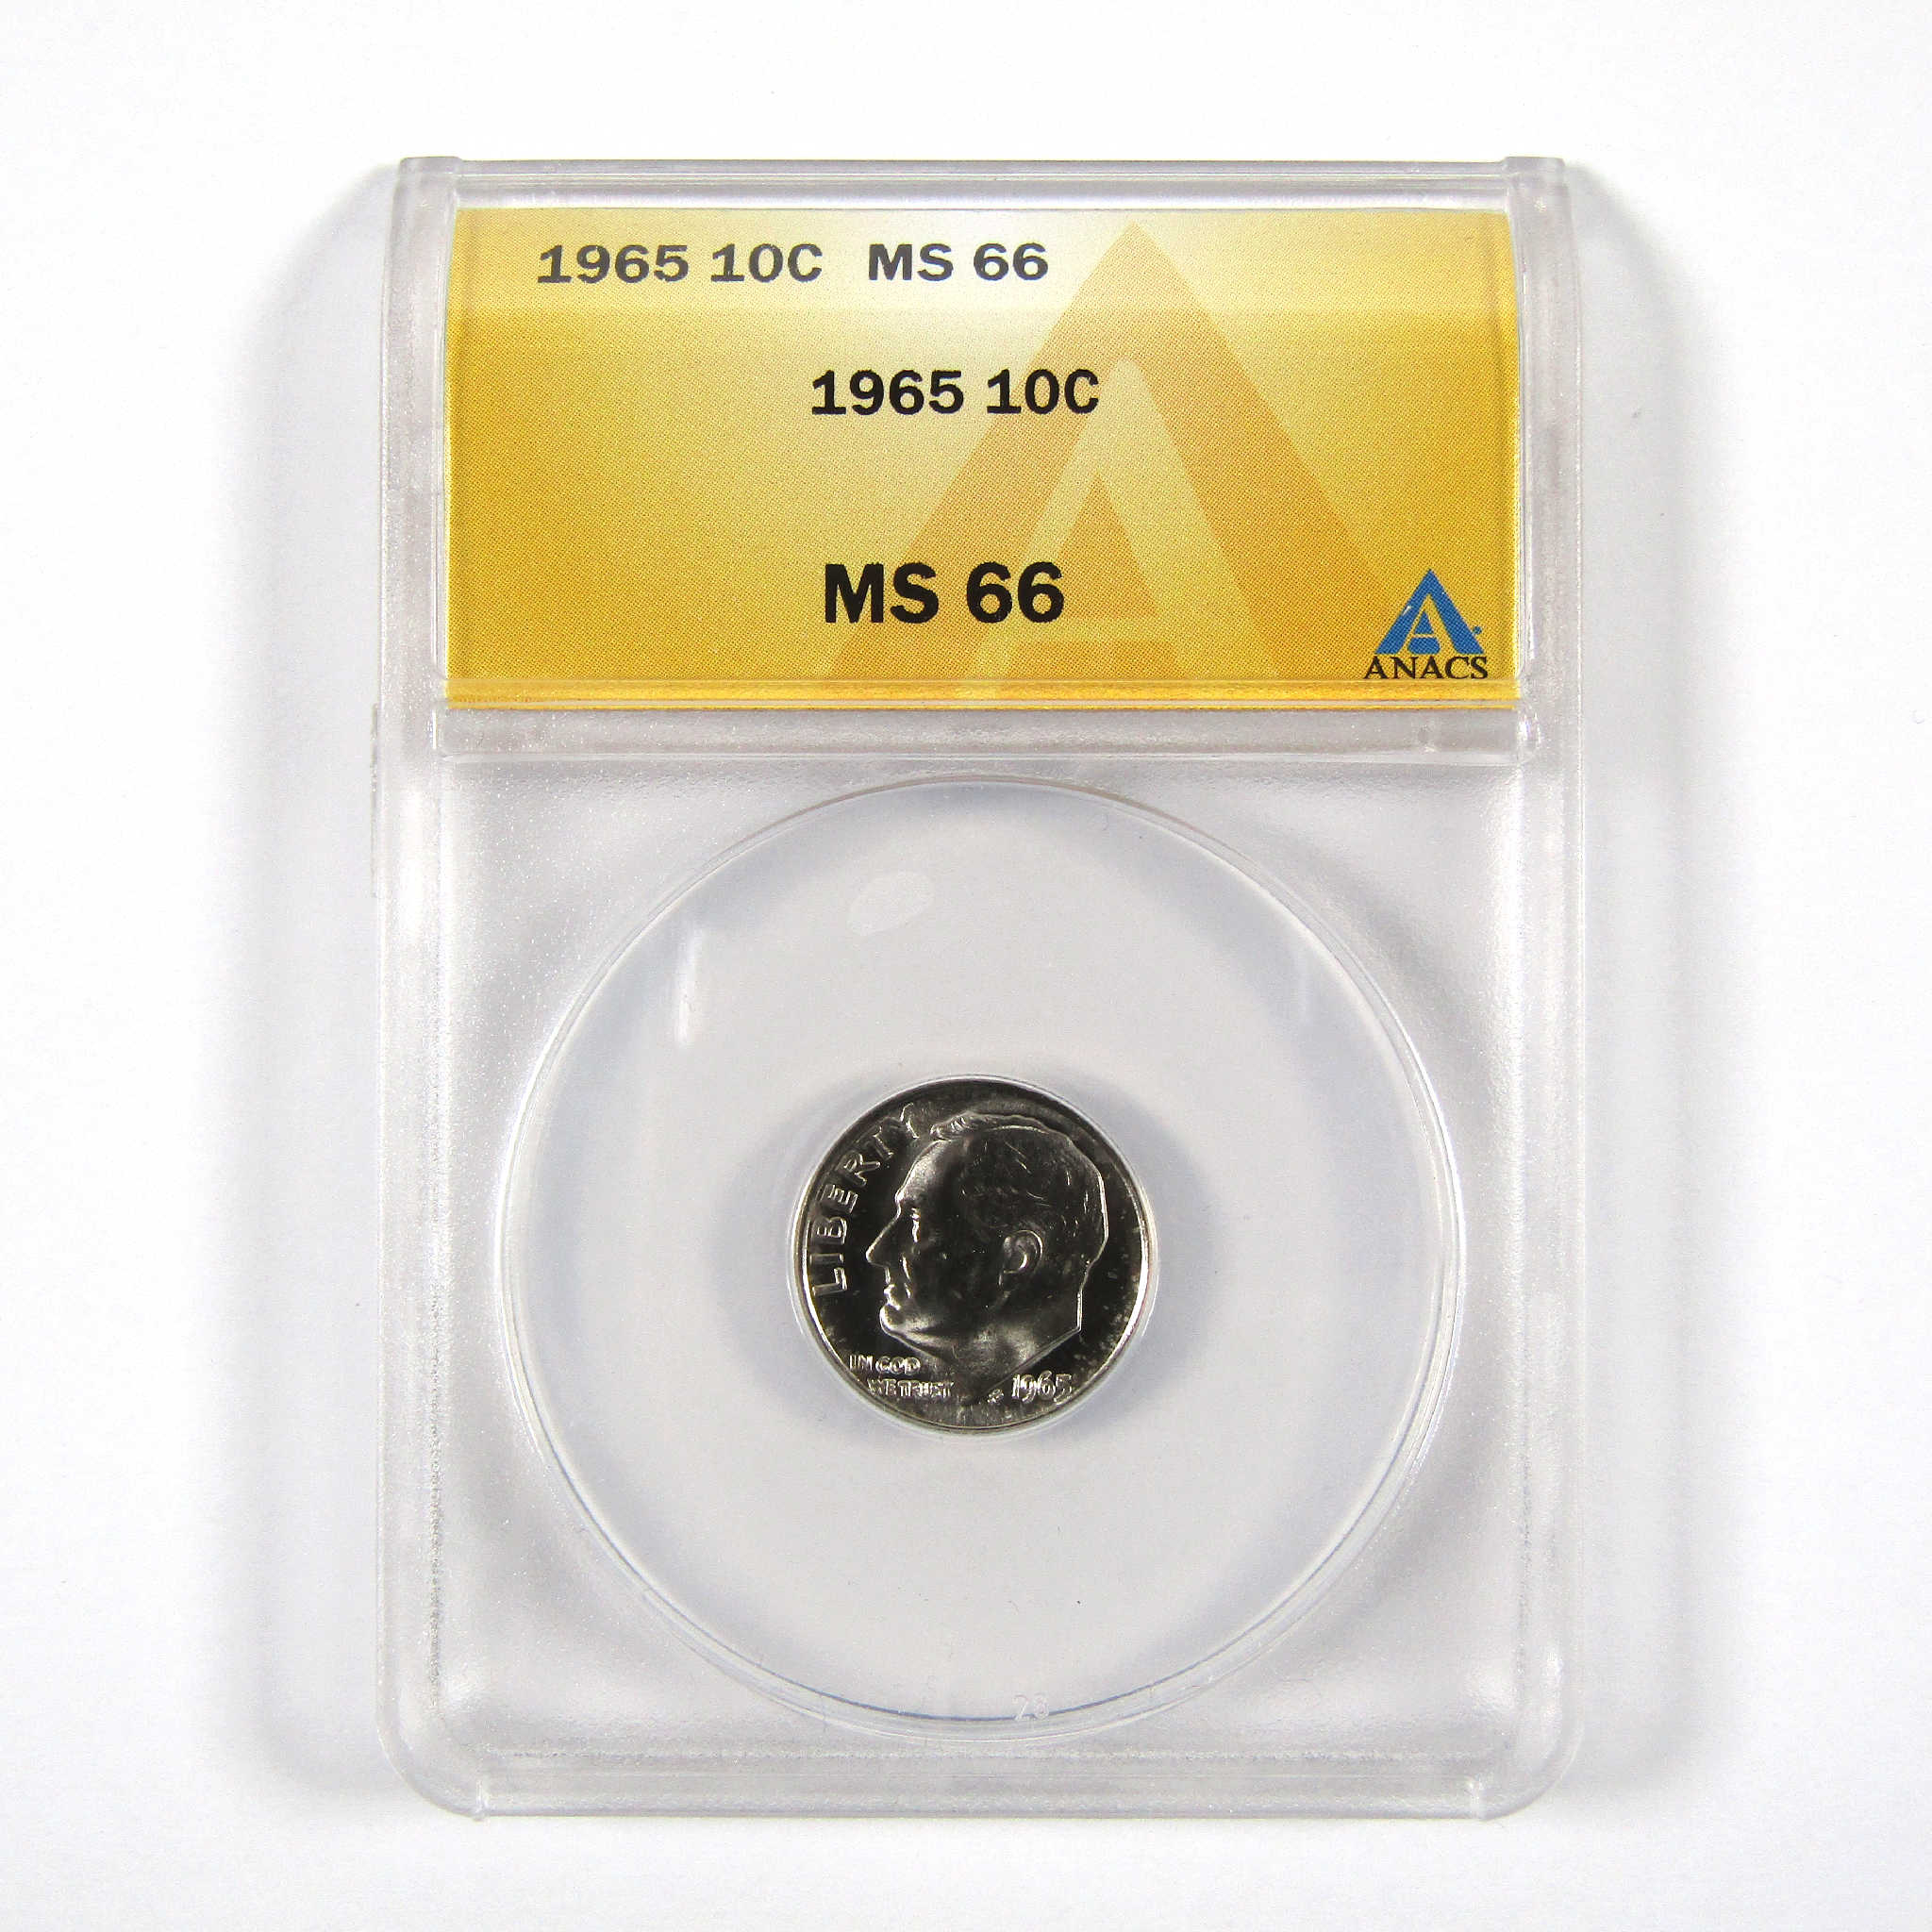 1965 Roosevelt Dime MS 66 ANACS Clad 10c Uncirculated Coin SKU:CPC4041